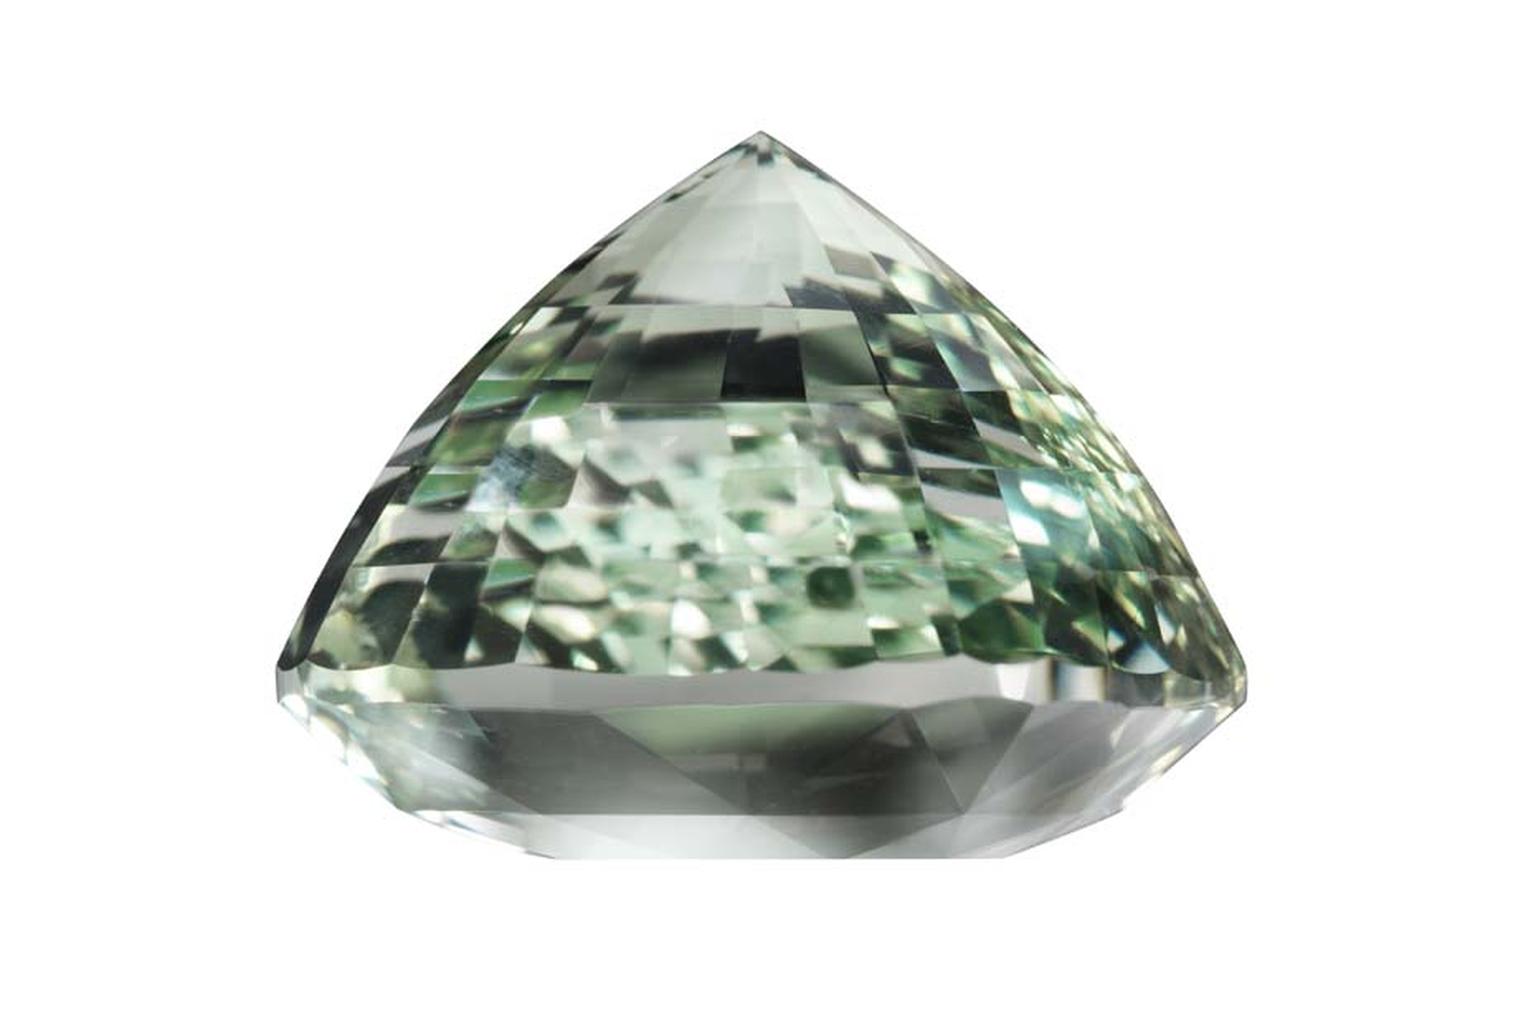 The multi-faceted, unheated, cushion-cut aquamarine from Mozambique was donated to the Fine Cell Work charity by renowned gem hunter Guy Clutterbuck.